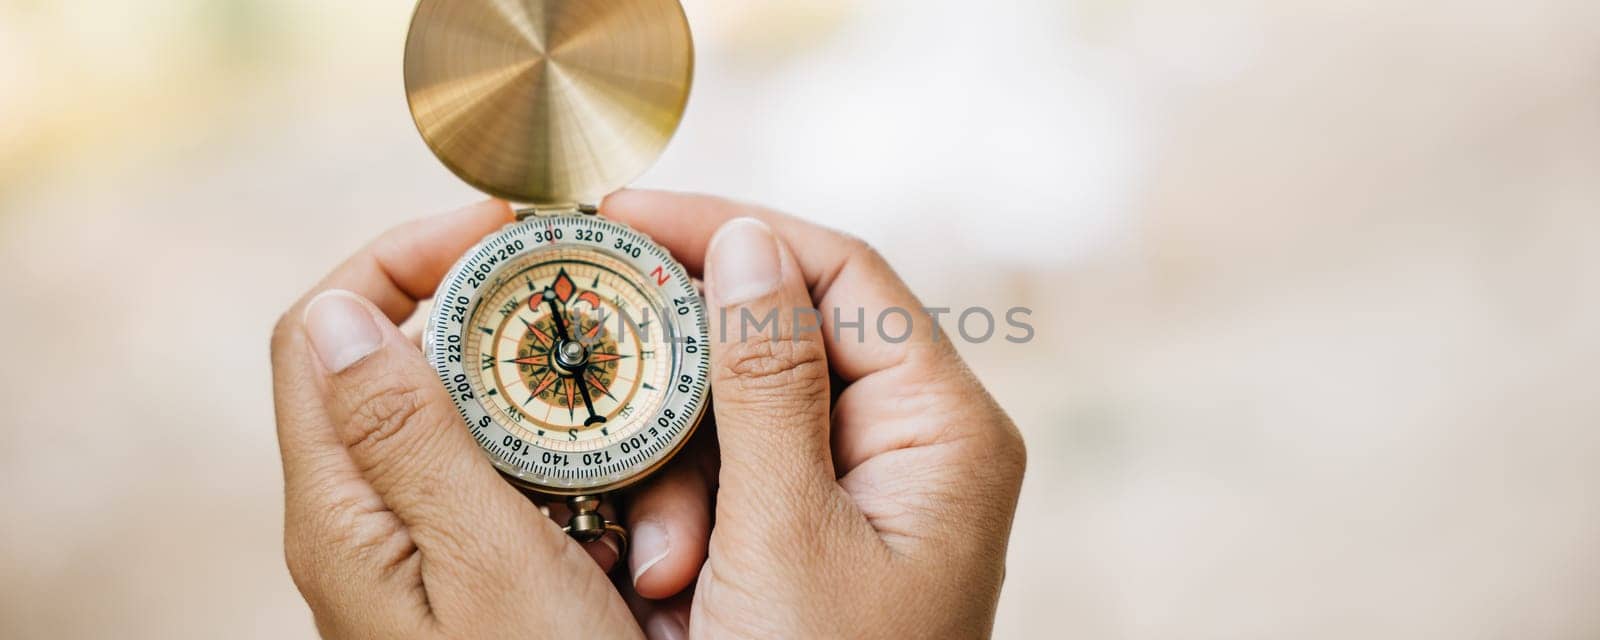 Surrounded by the beauty of nature a woman's hand grips a compass in a tranquil forest and lake setting. The image symbolizes guidance and the exciting spirit of exploration amidst the outdoors.